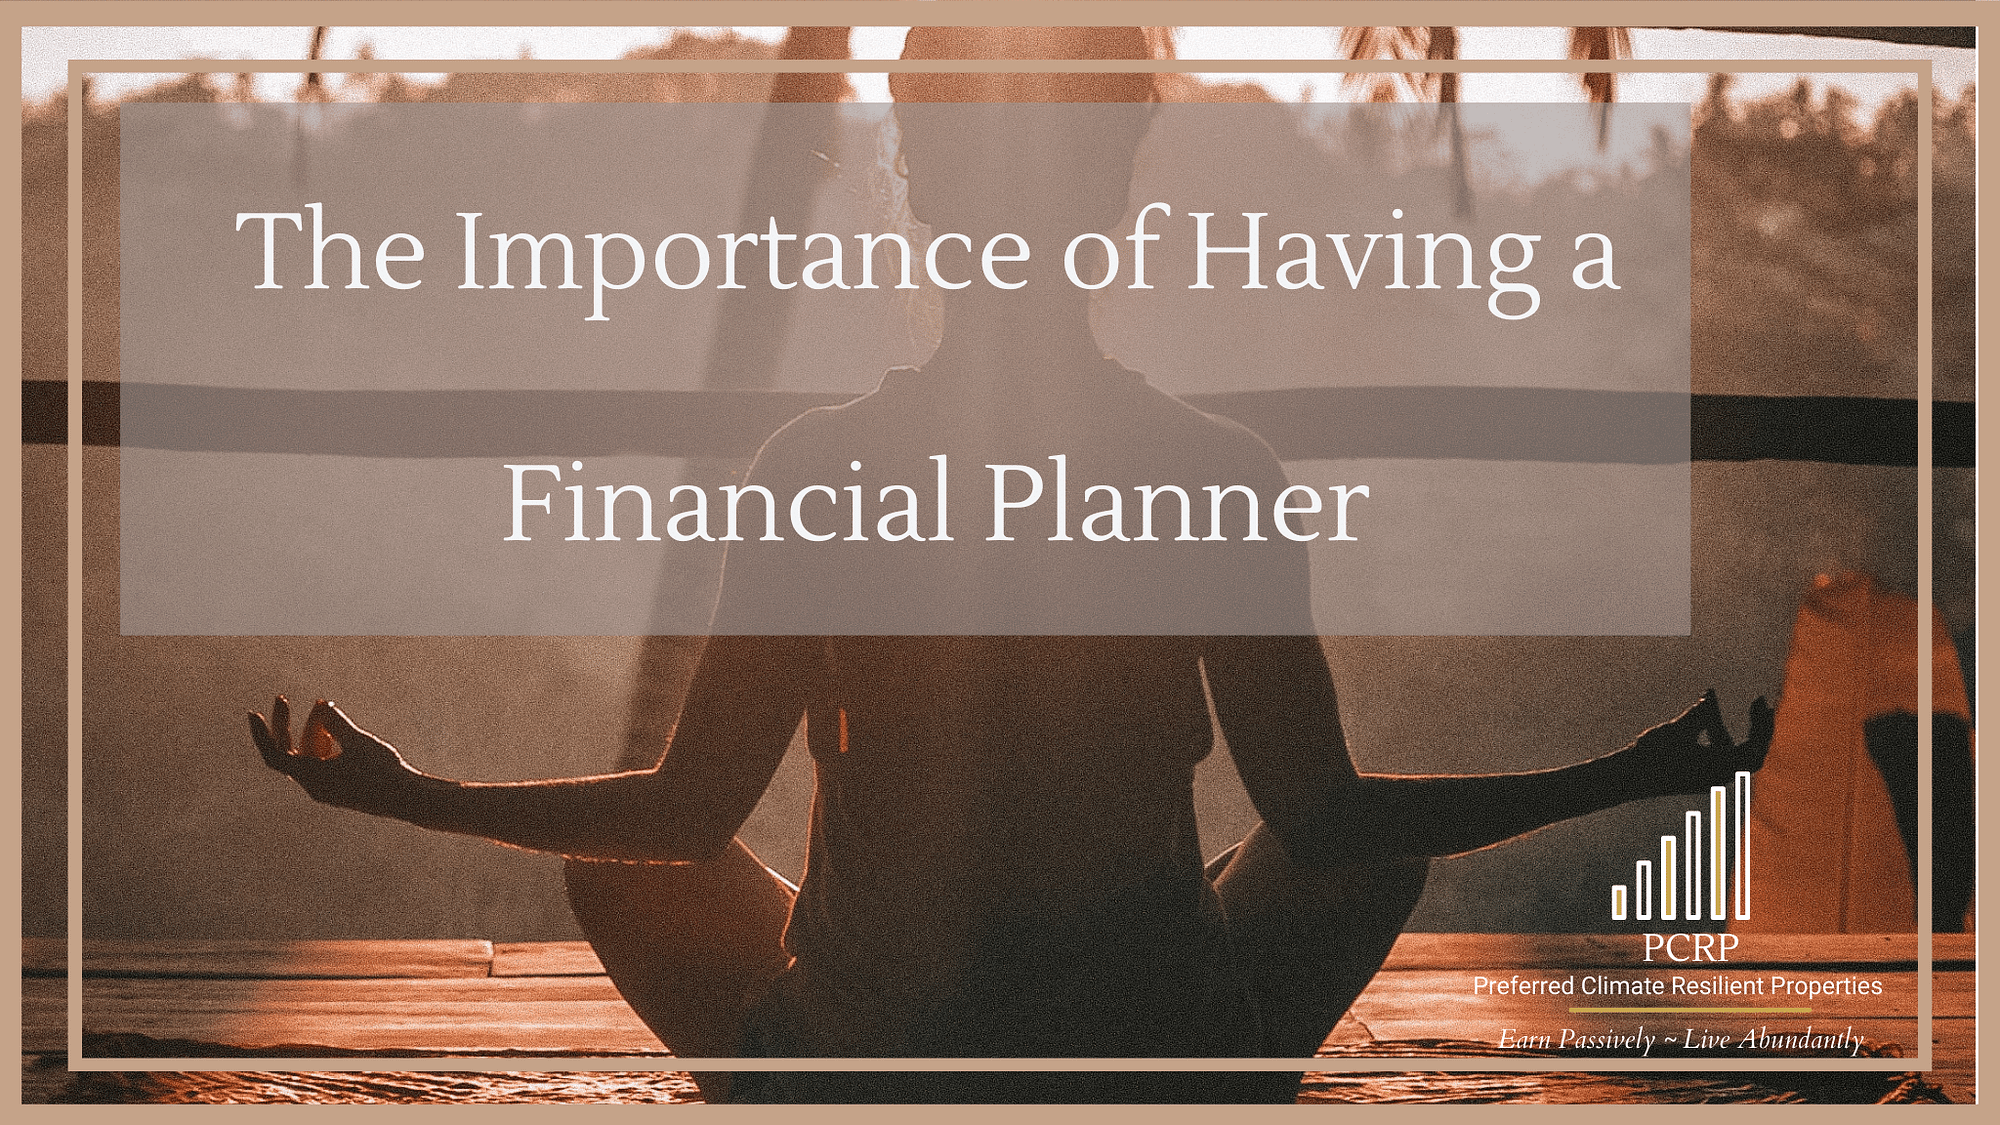 The importance and benefits of financial planning